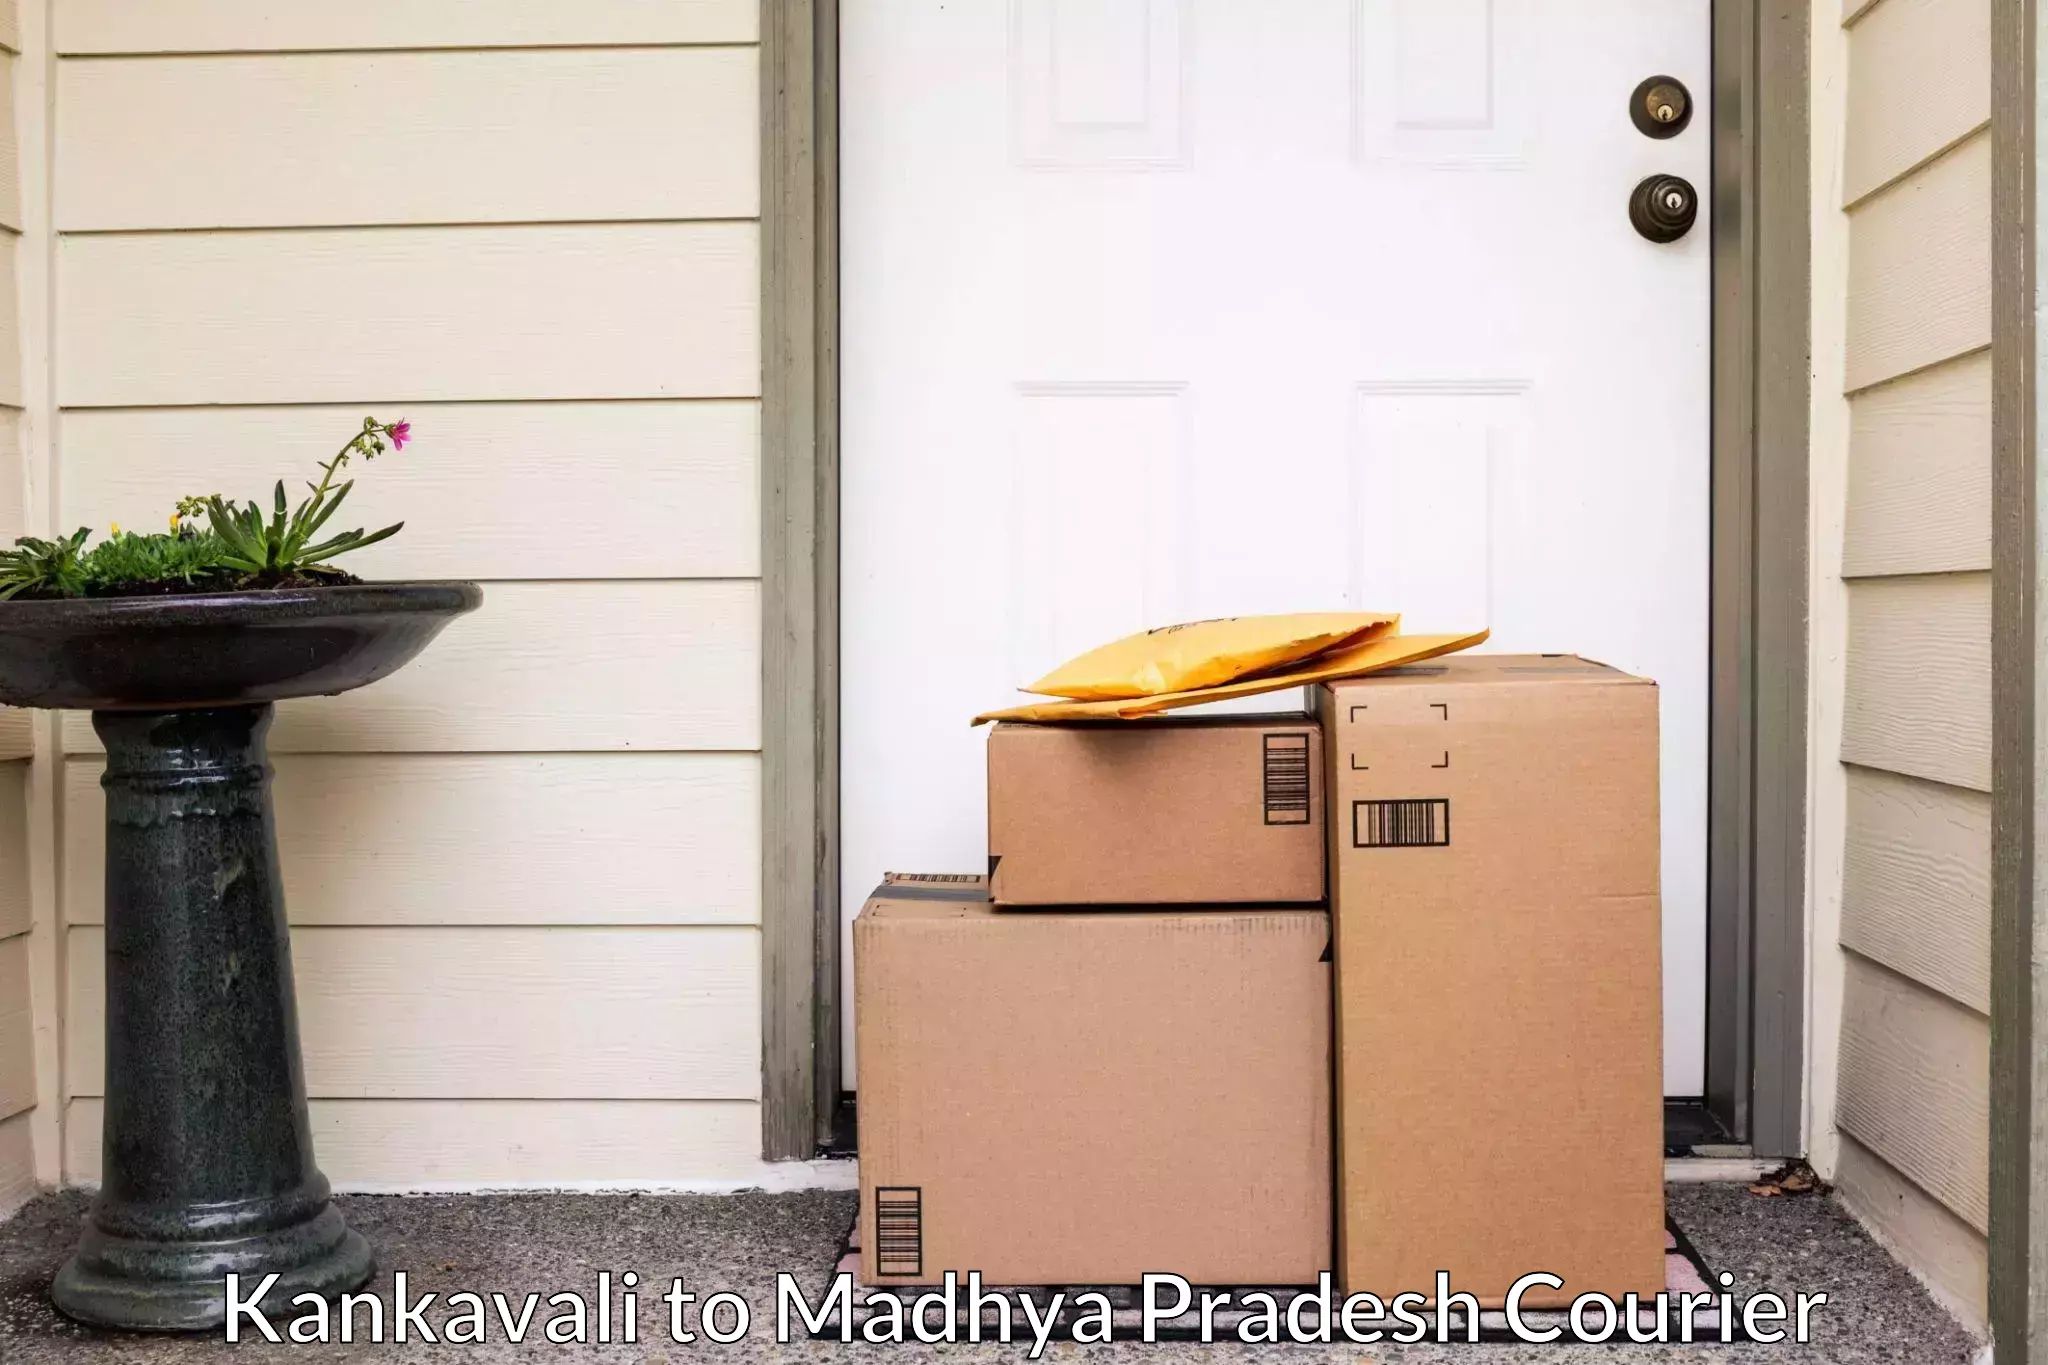 Trusted moving company Kankavali to Chand Chaurai